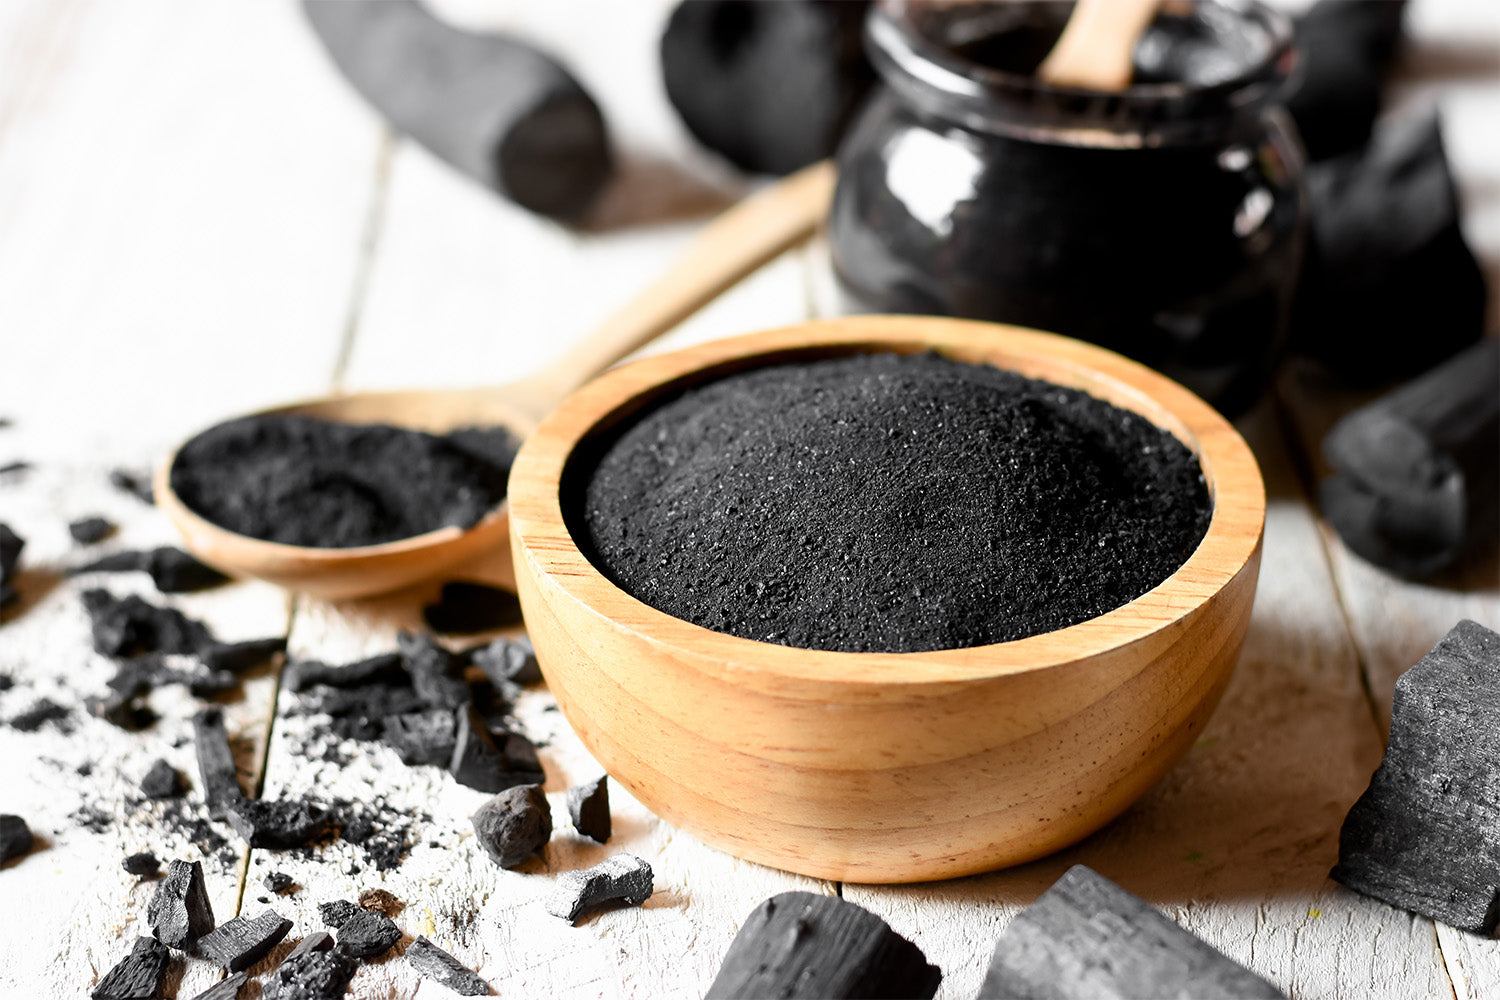 What Is Activated Charcoal? What Are Its Benefits?